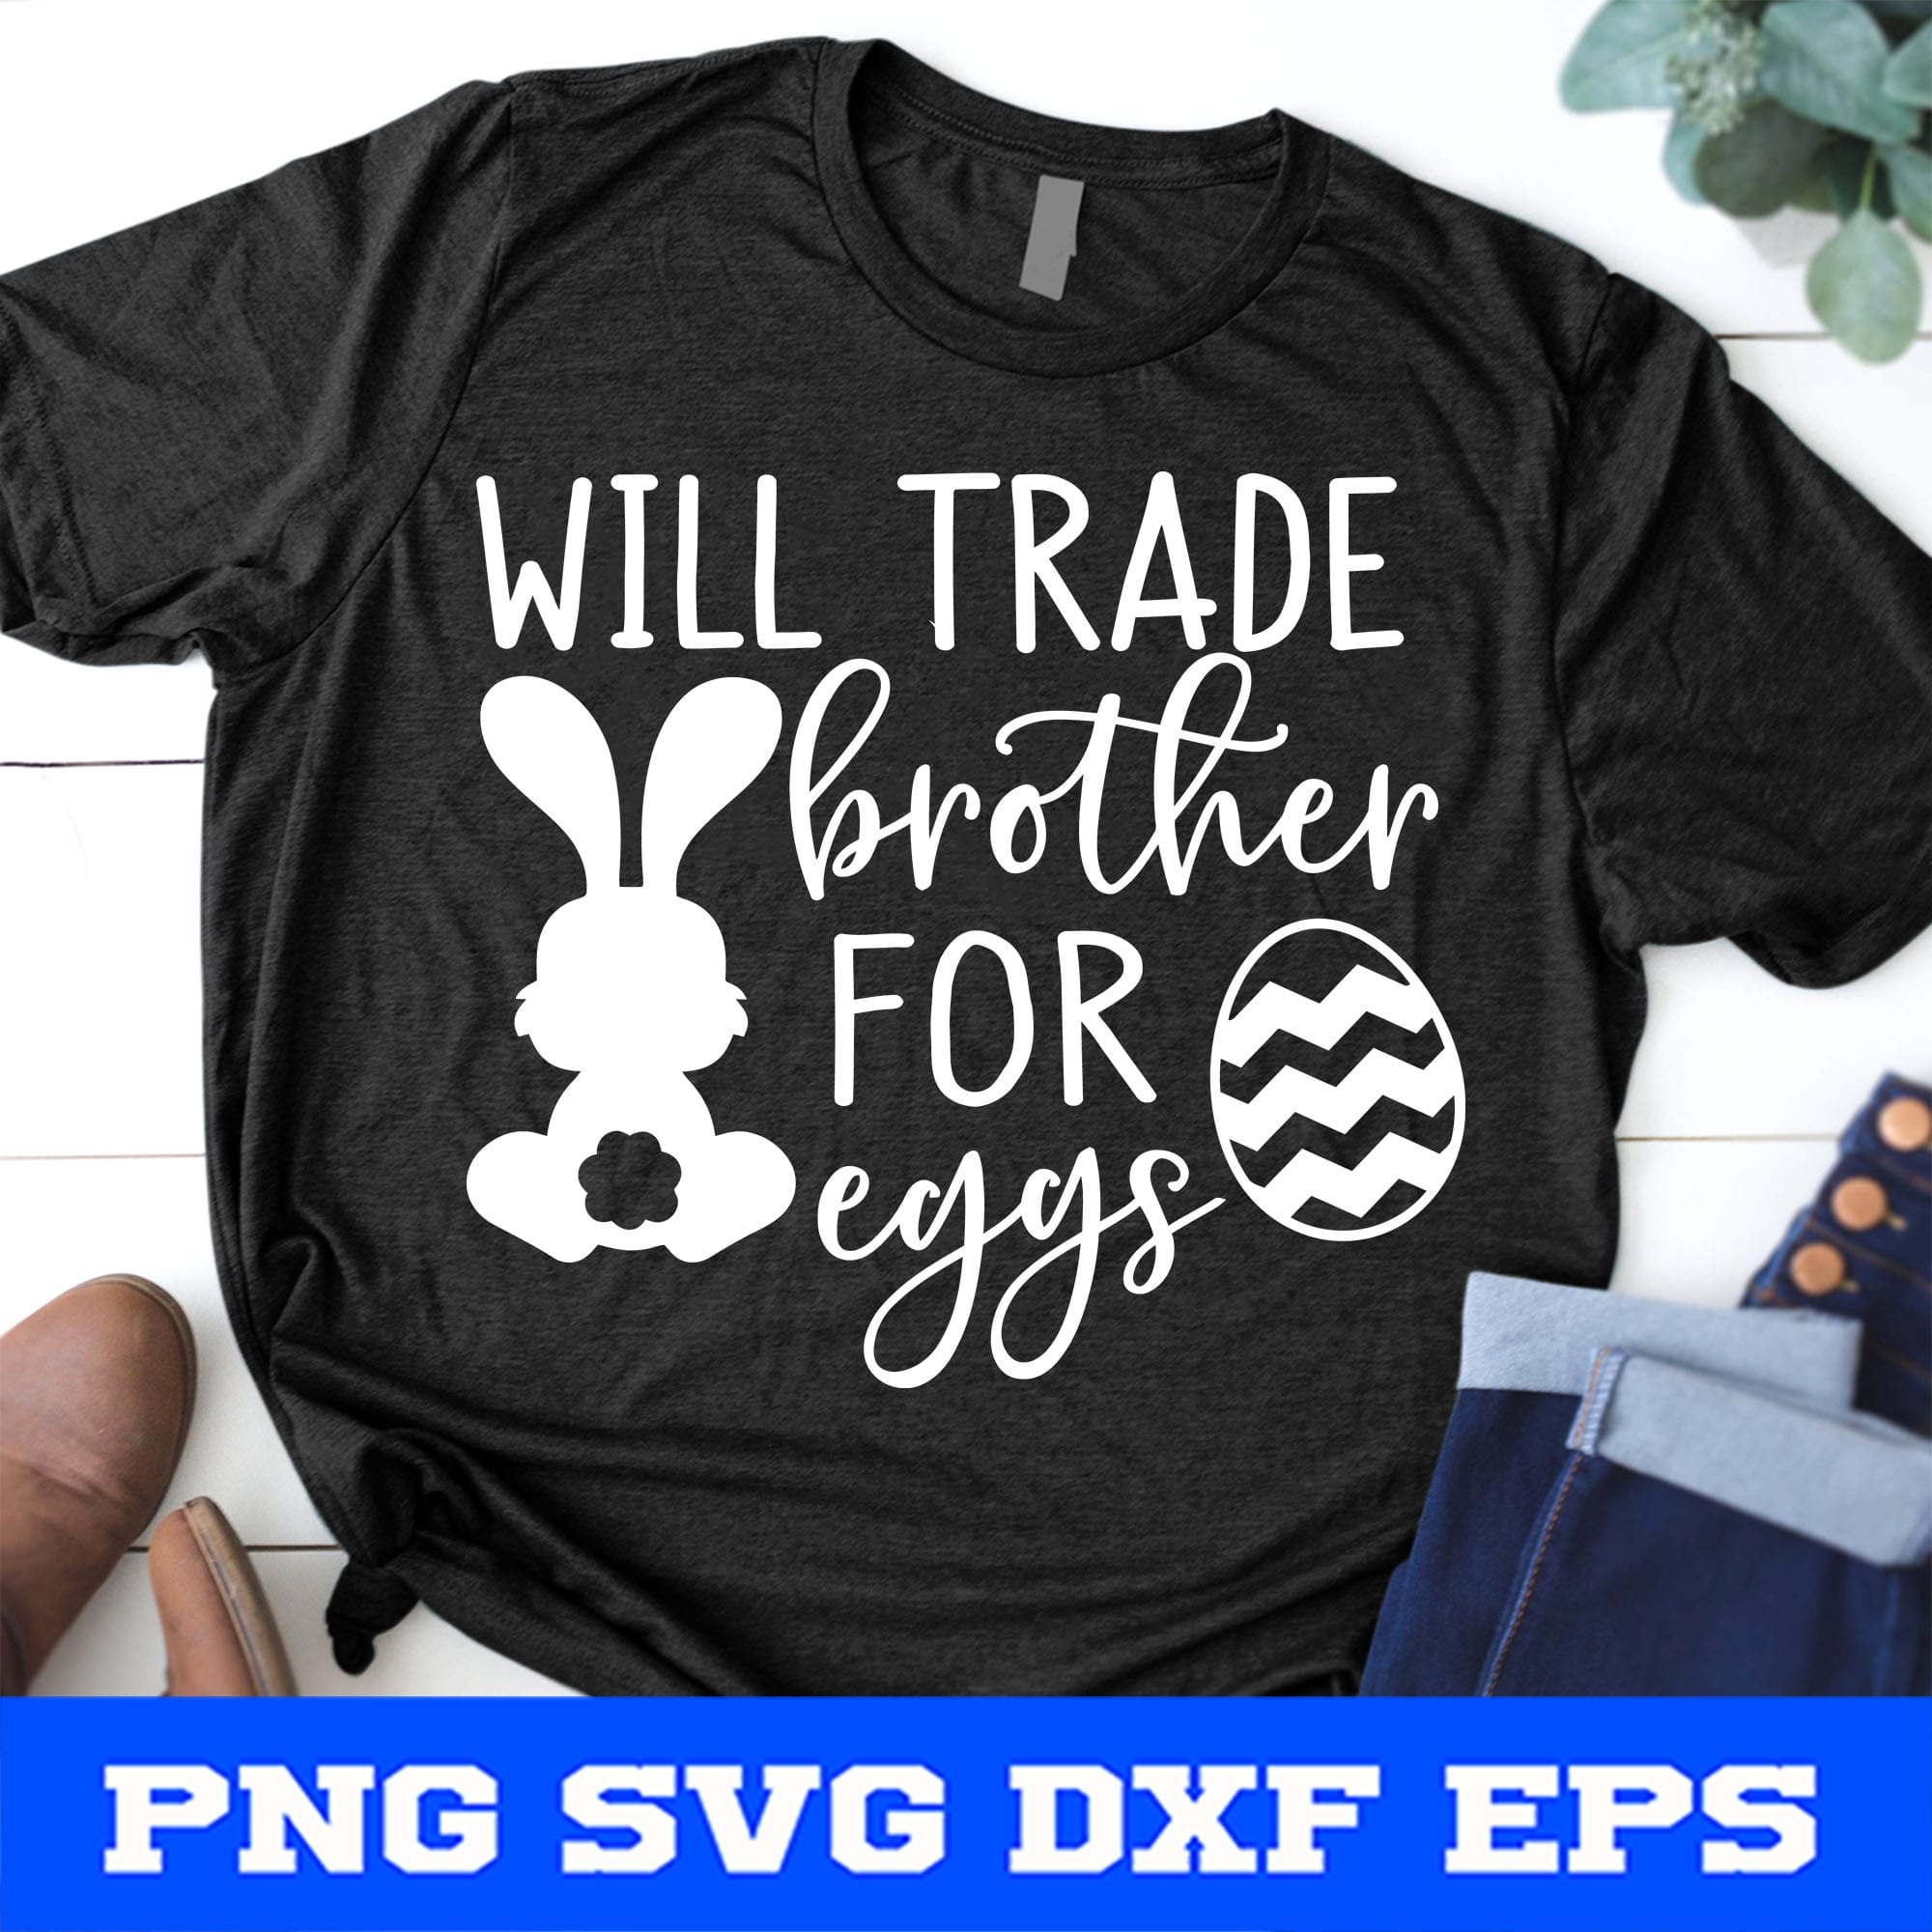 INSTANT DOWNLOAD: Will trade sister and brother for Easter Eggs svg png eps and dxf files